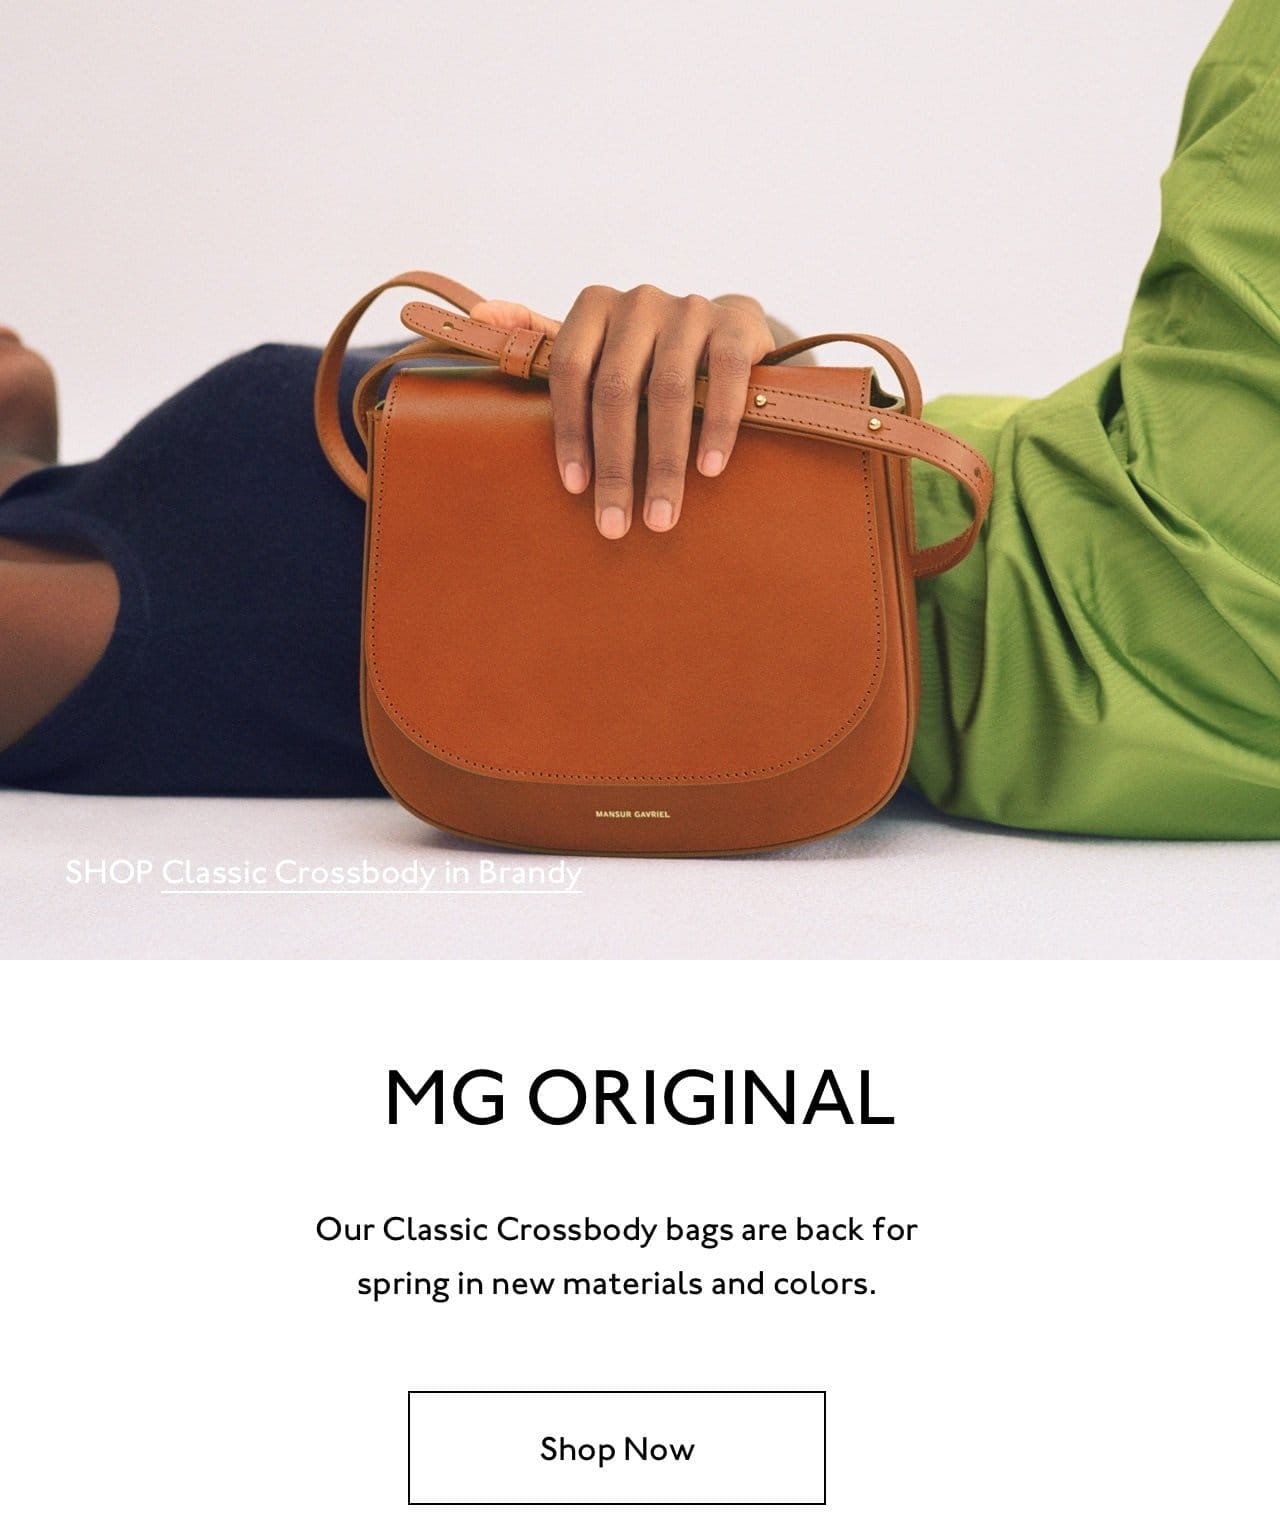 Shop an MG Original: the Classic Crossbody in new materials and colors for spring.